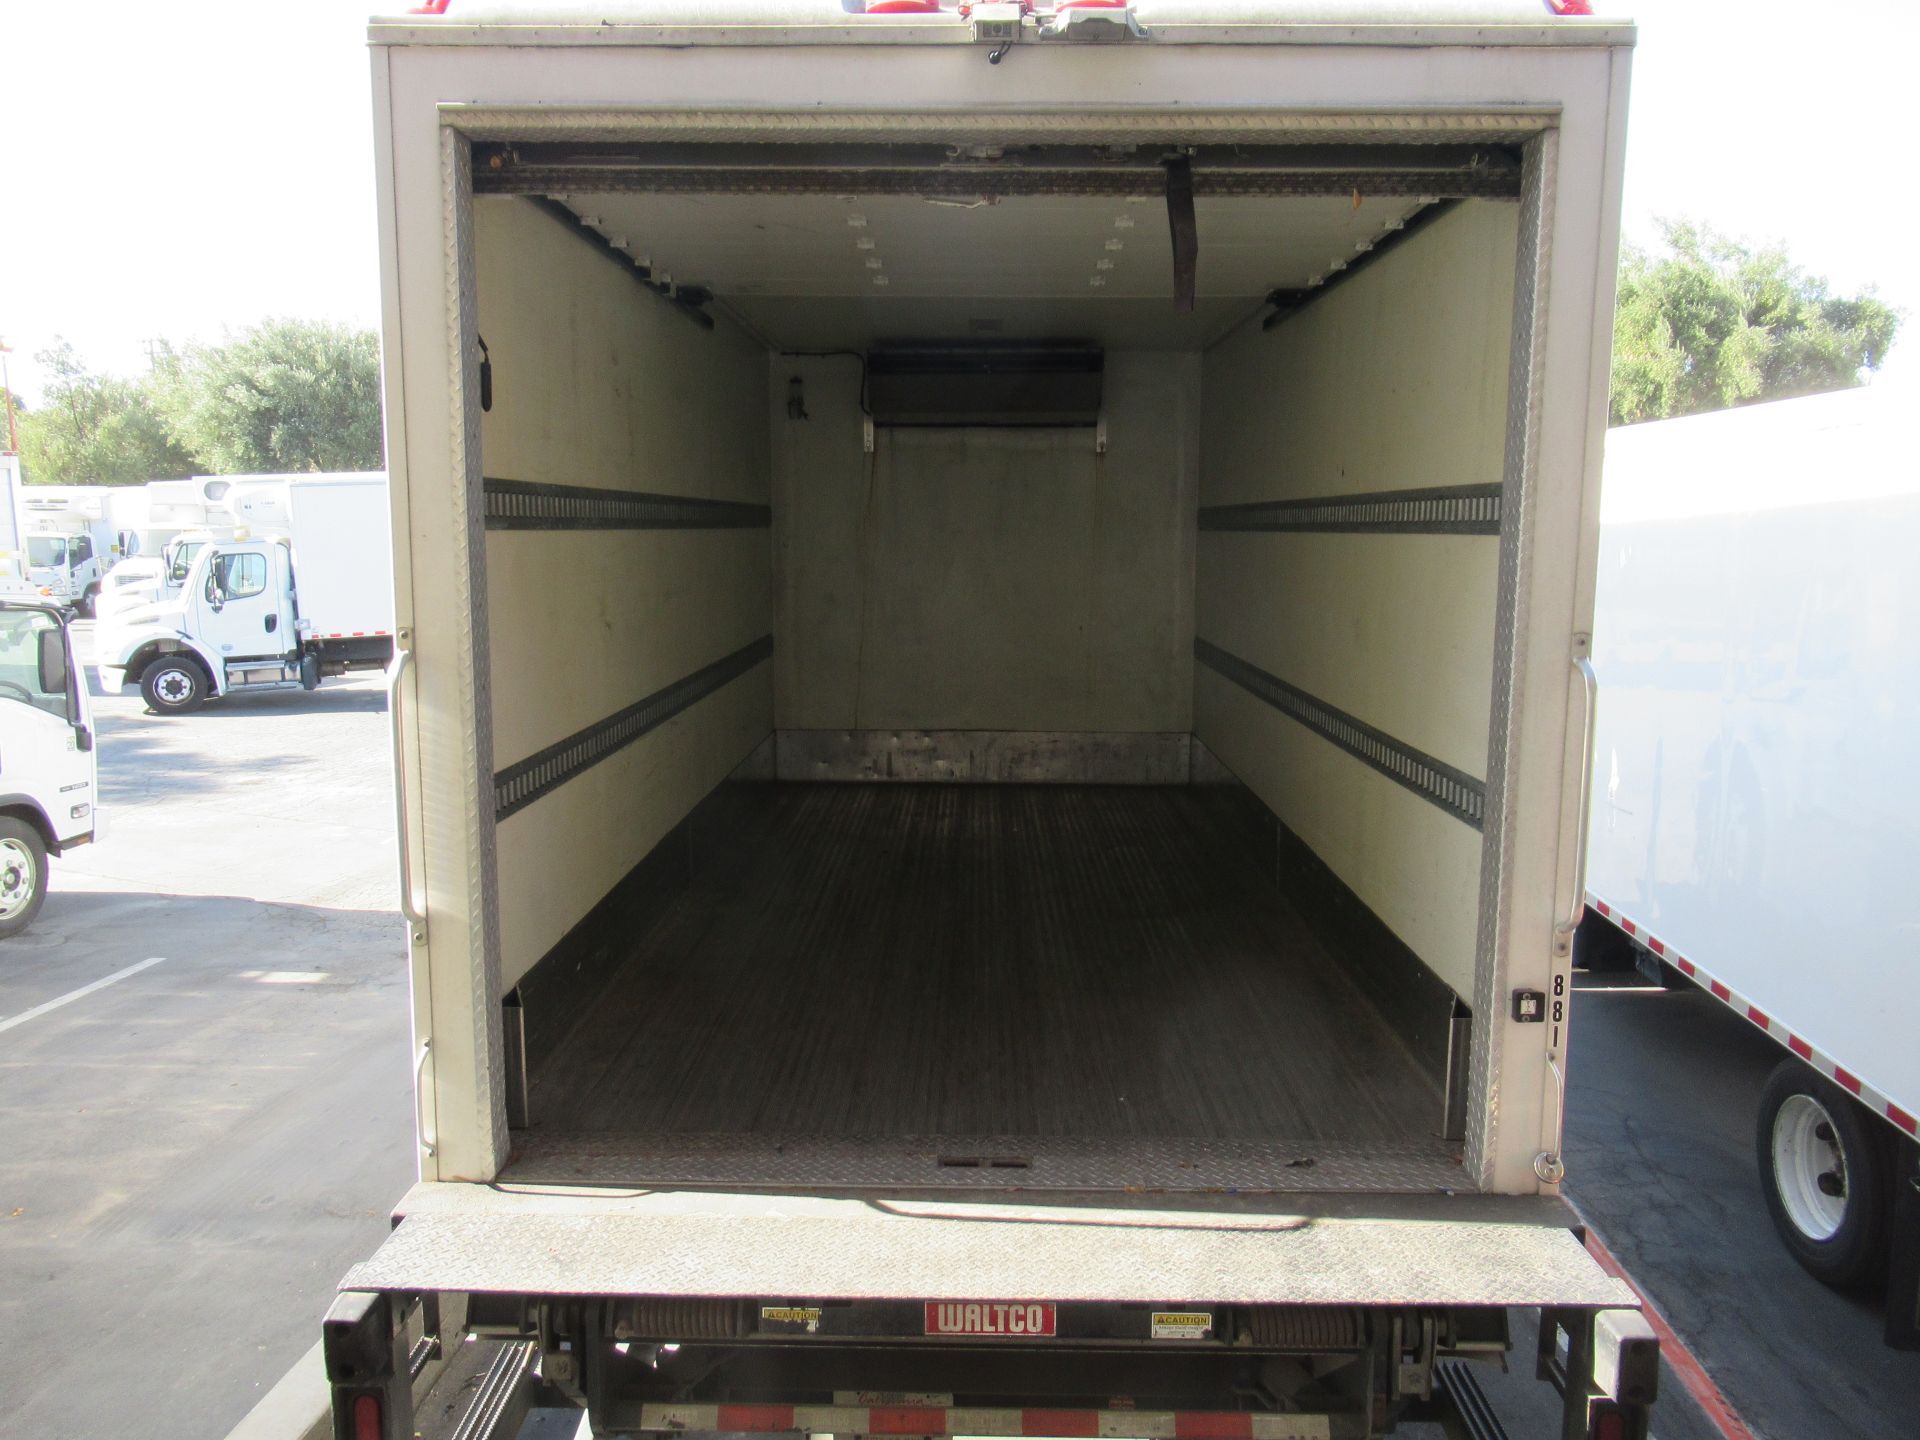 2015 Freightliner refrigerated truck - Image 6 of 9